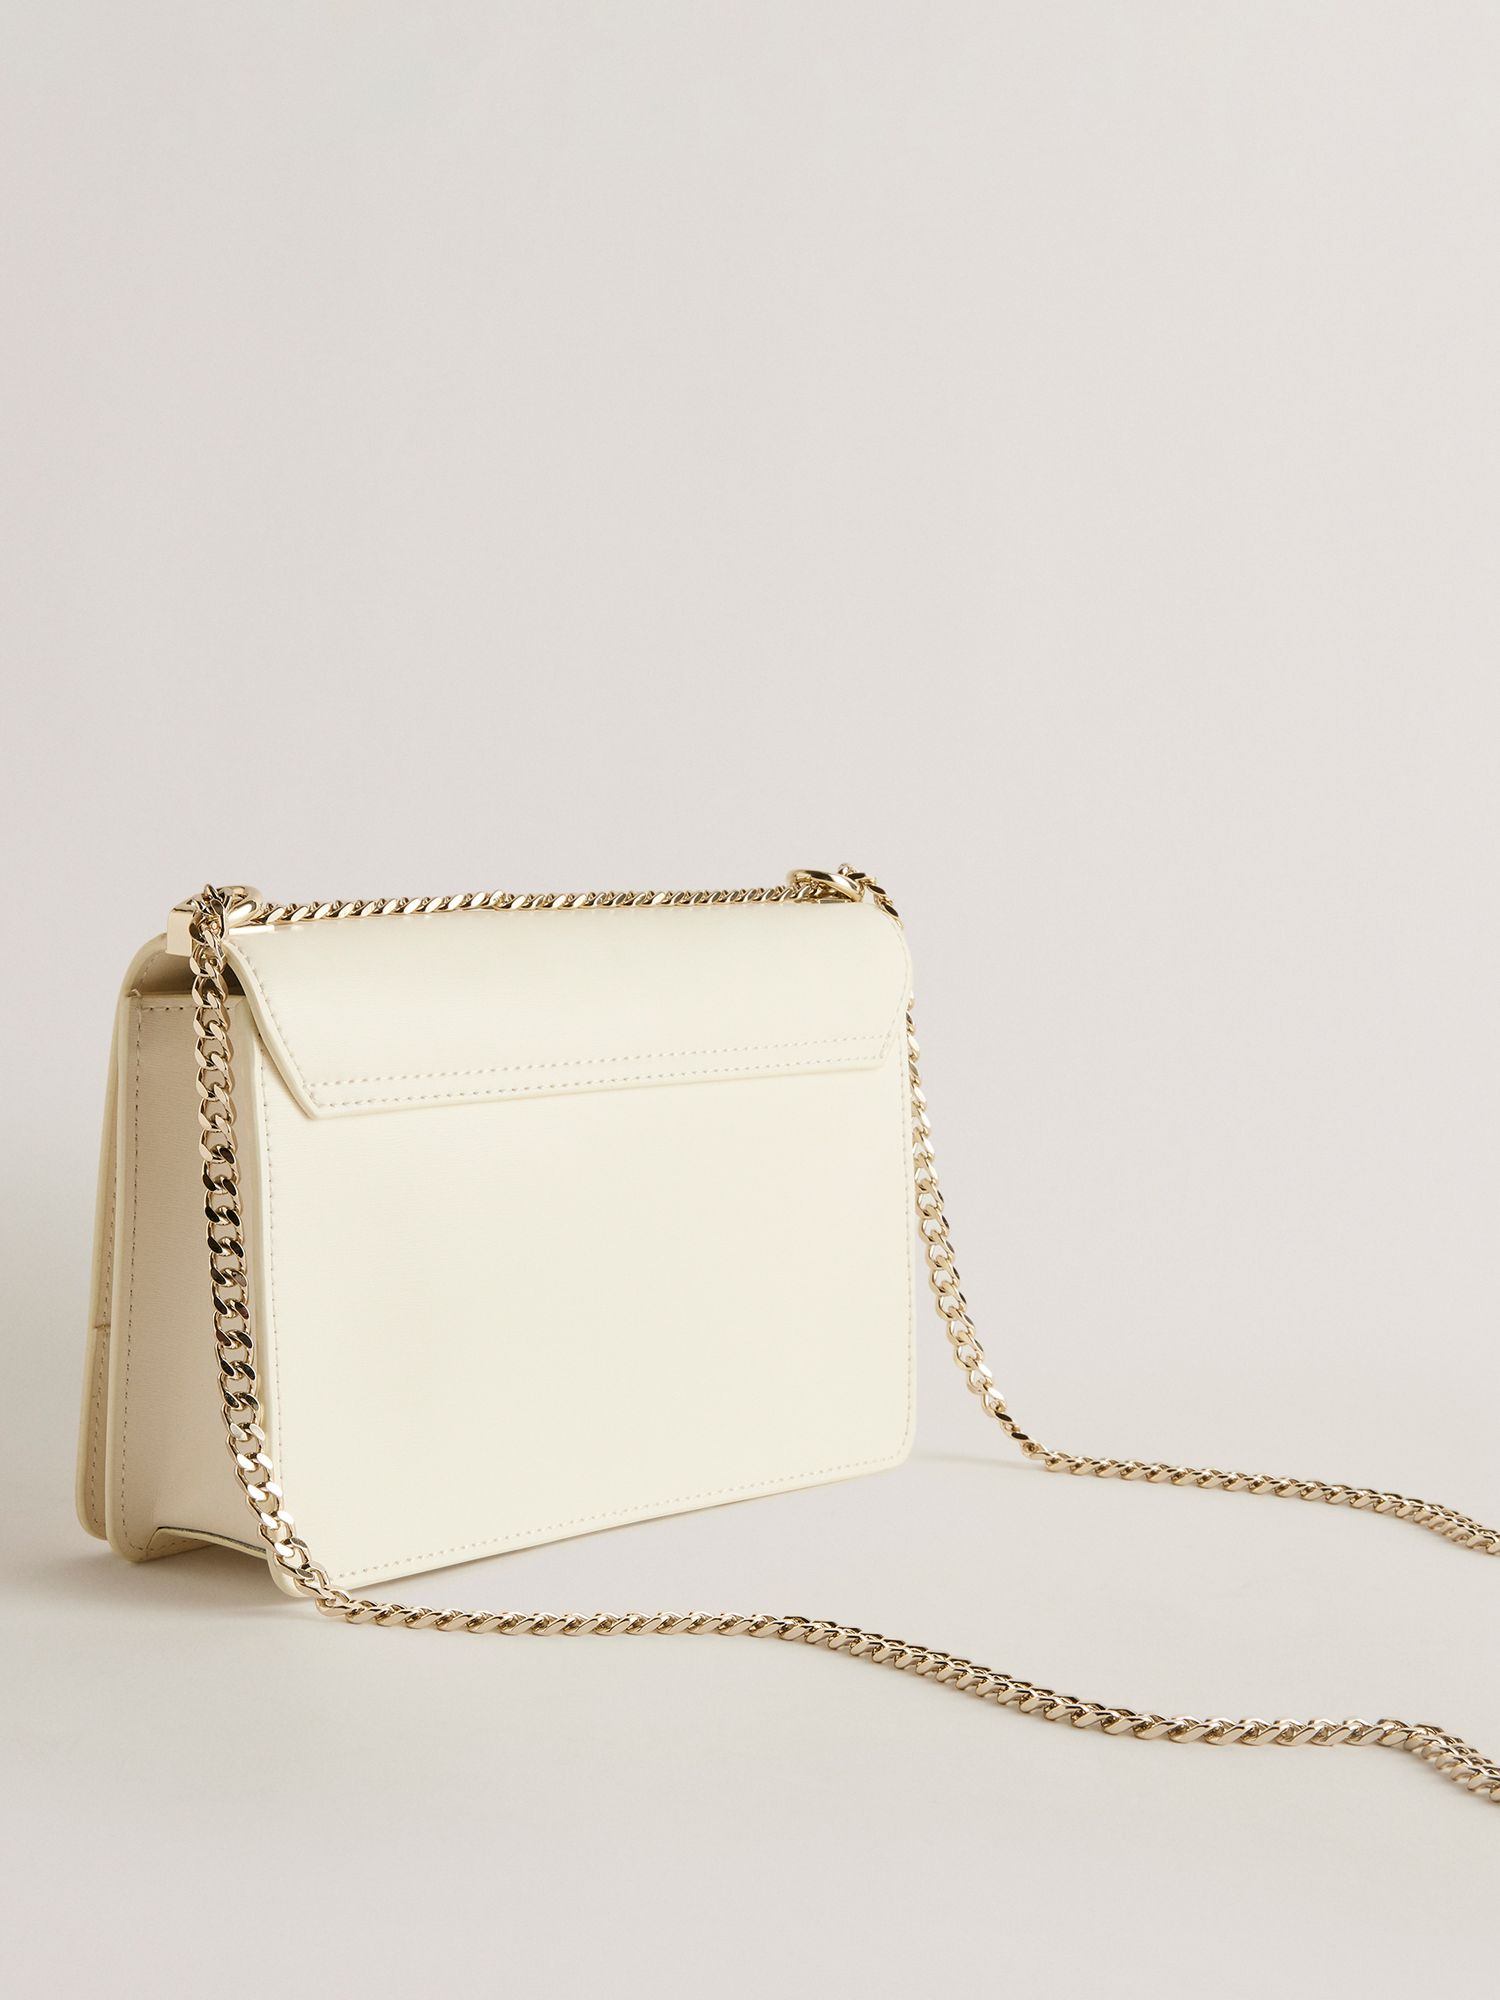 Ted Baker Baeleen Bow Detail Cross Body Leather Bag, Natural Cream, One Size